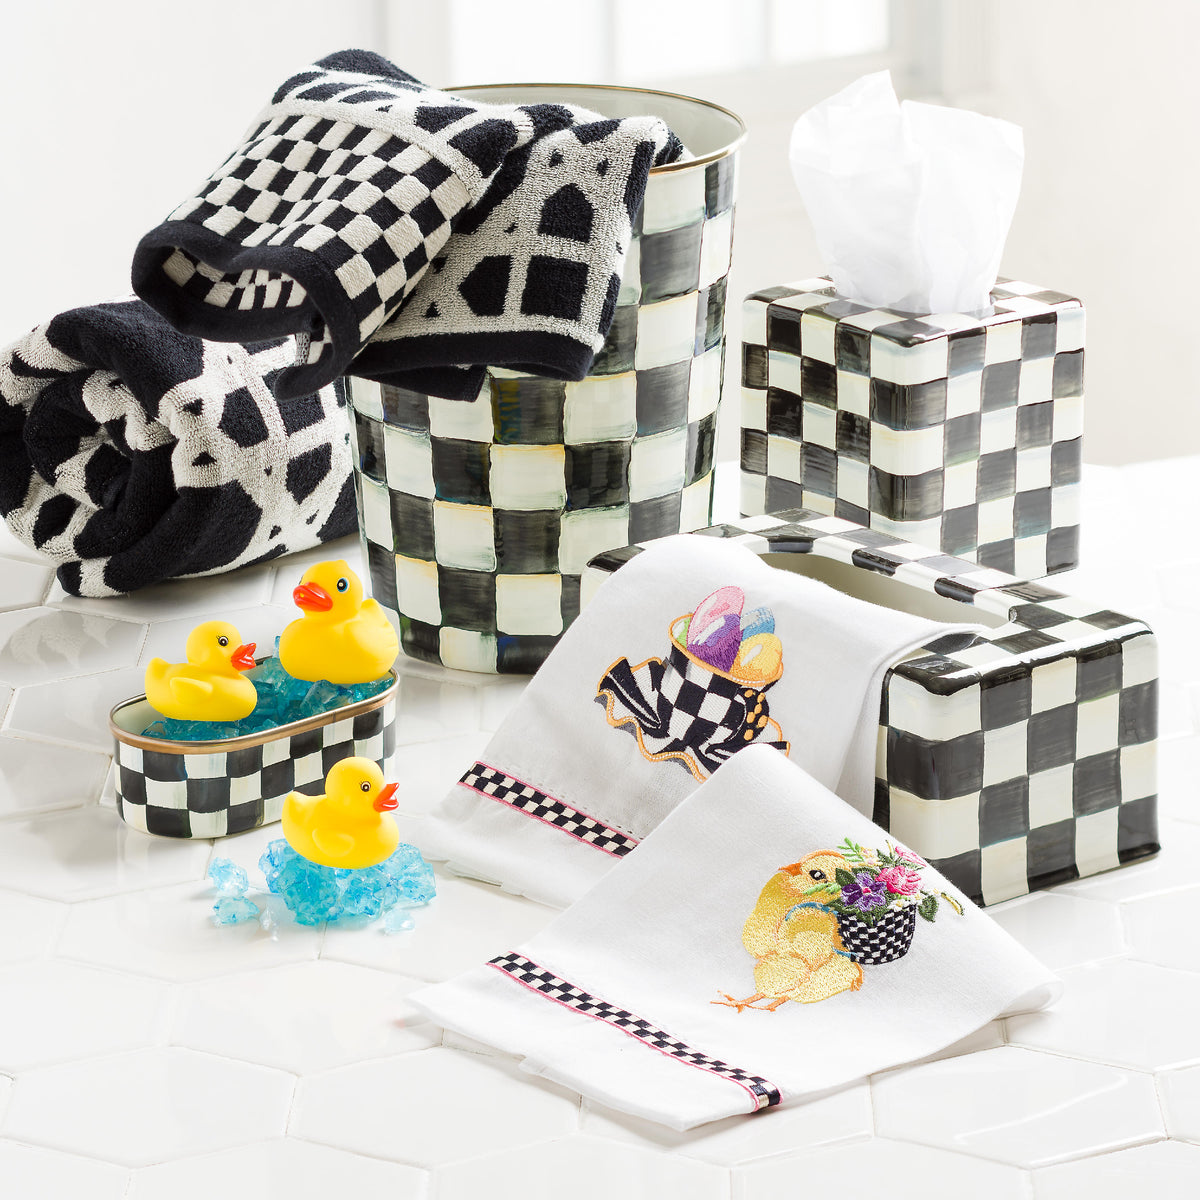 Courtly Check Standard Tissue Box Cover